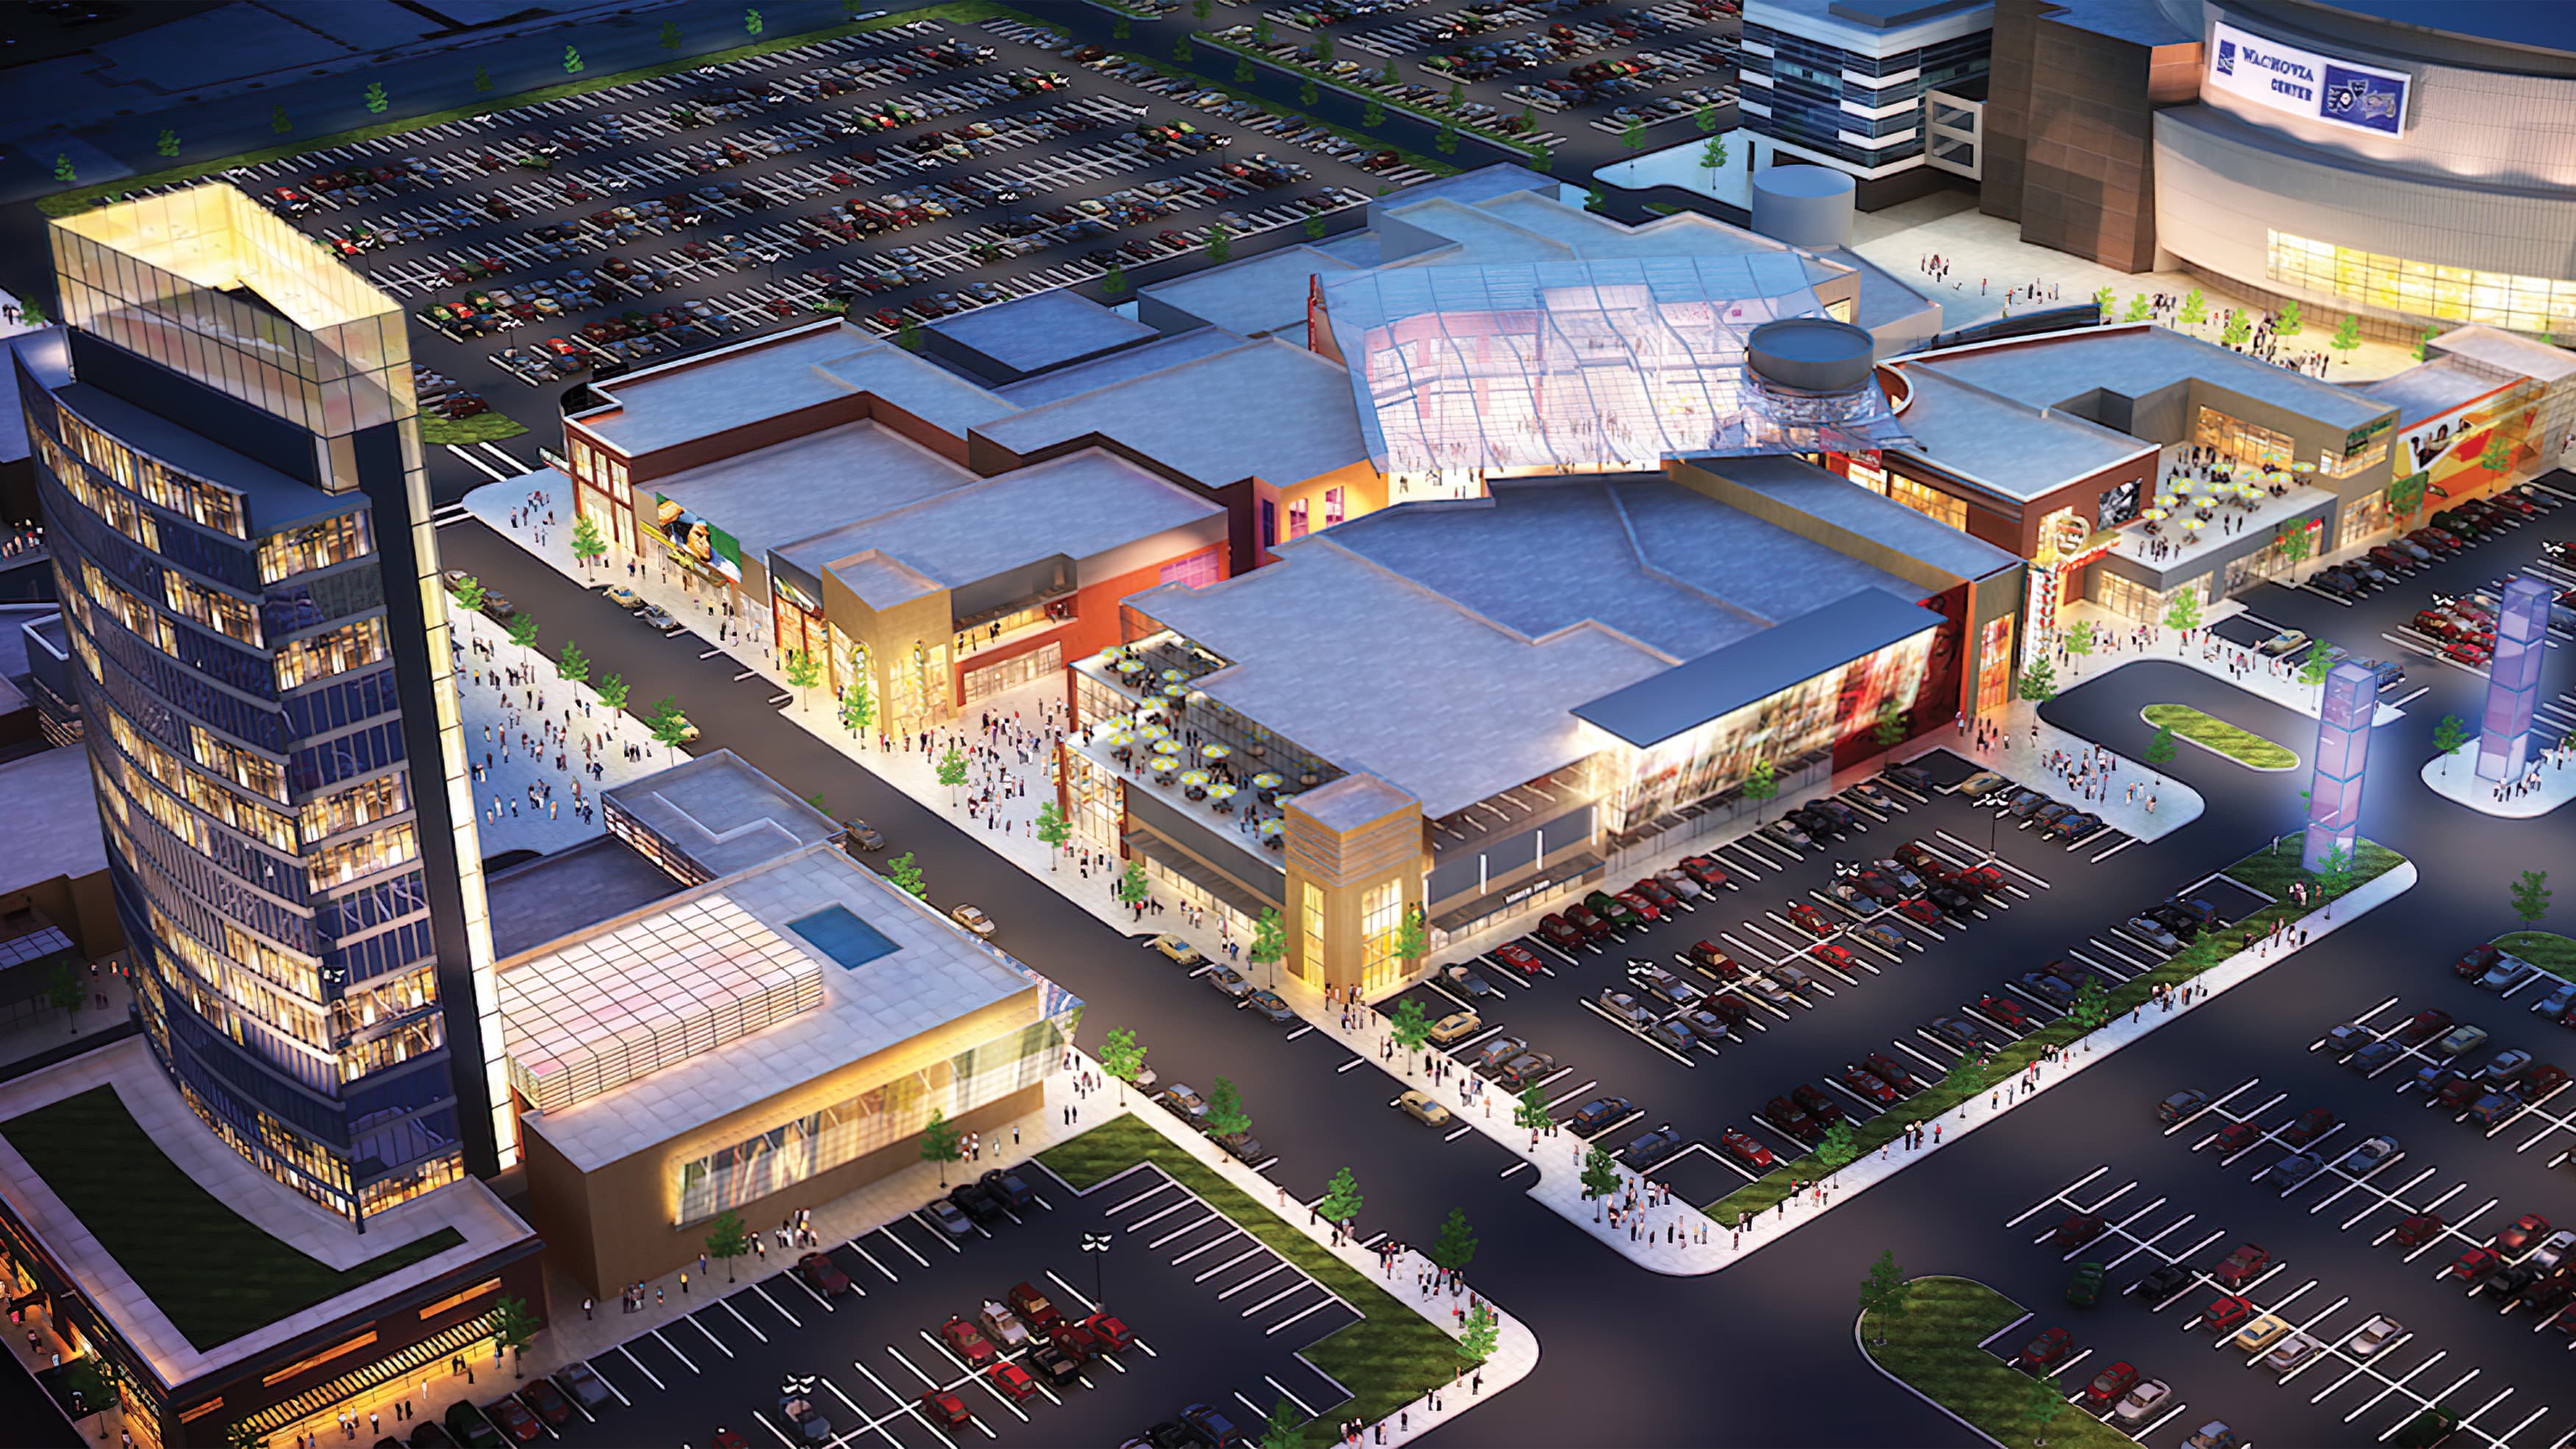 Architect's rendering of busy outdoor shopping center at dusk